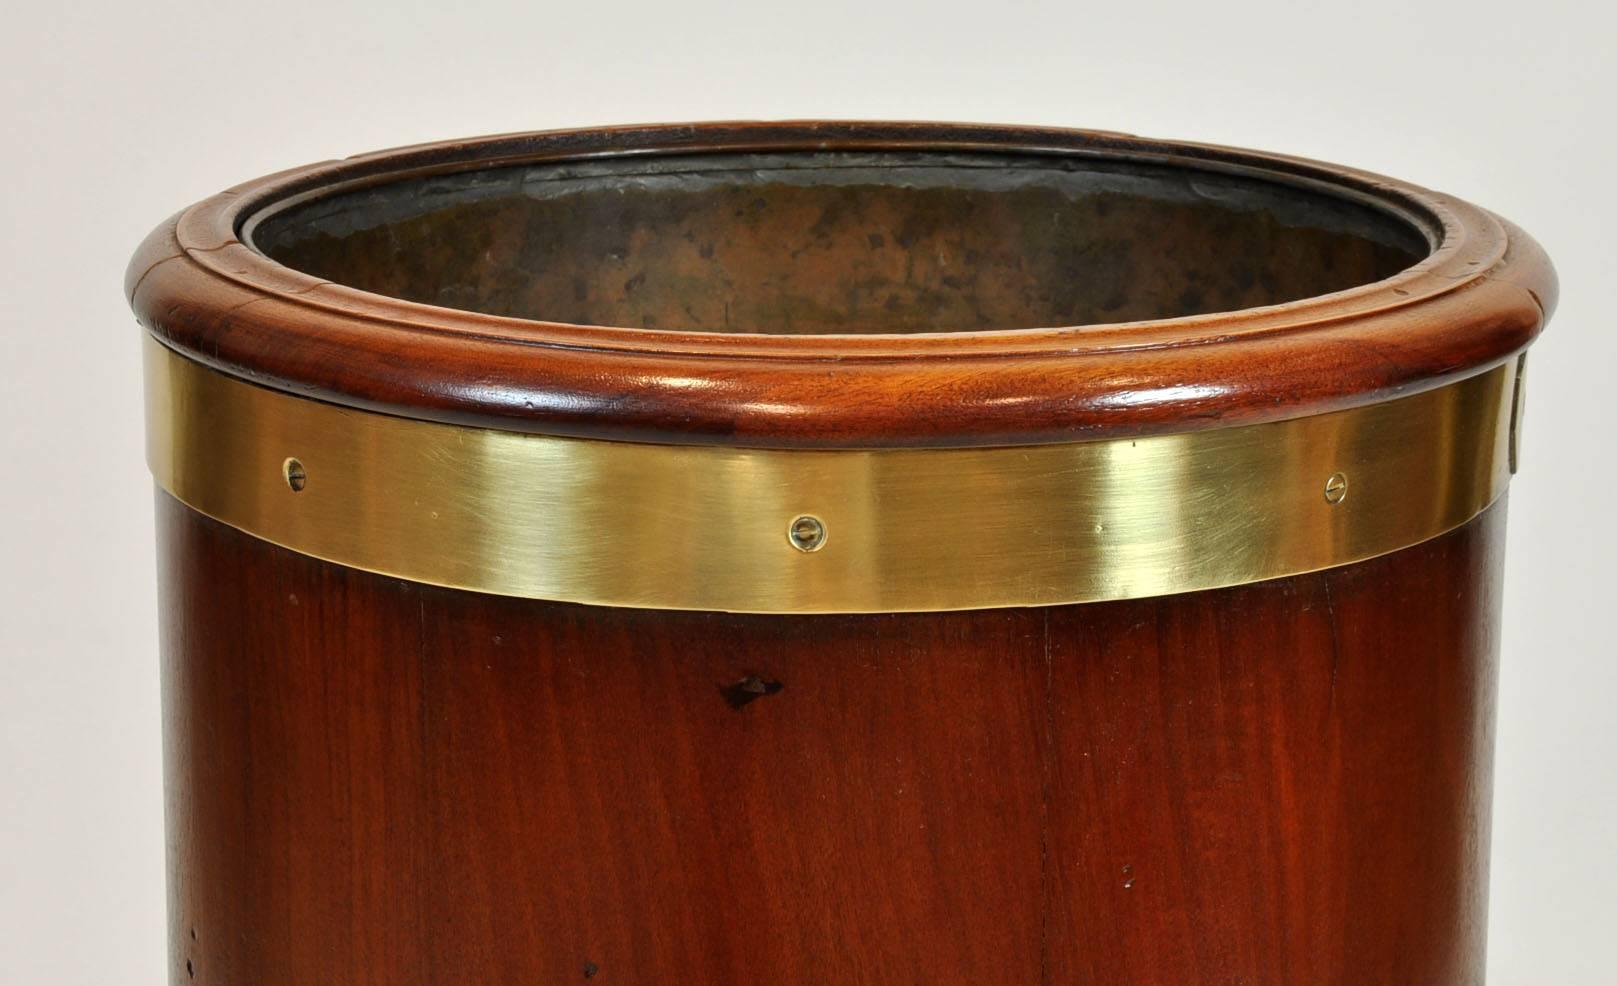 19th Century English Mahogany with Brass Bound Cane or Umbrella Holder with Liner